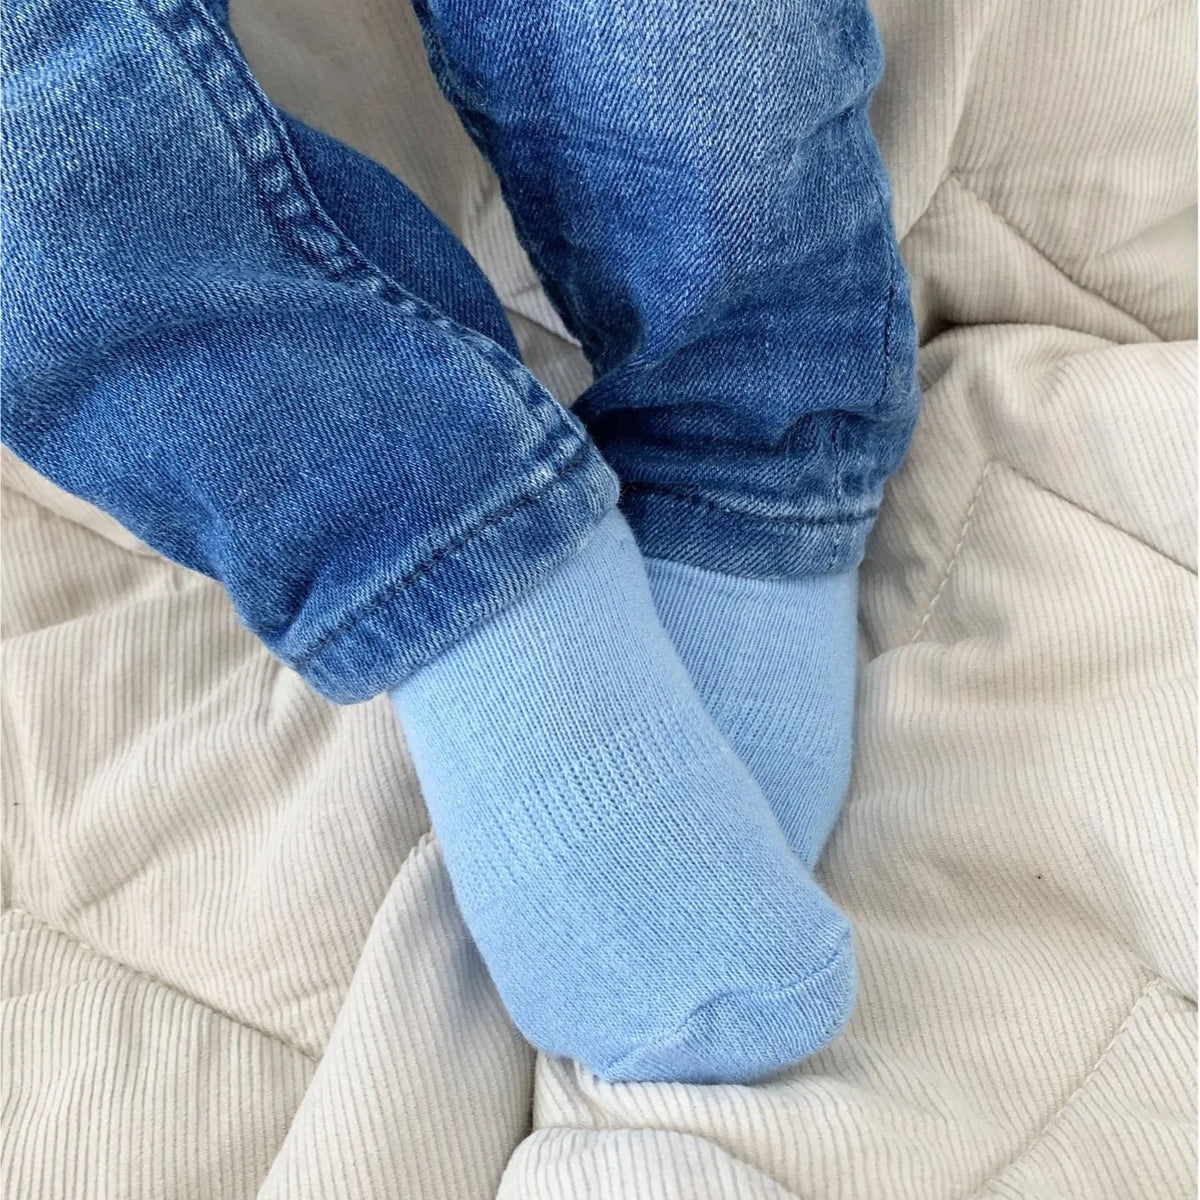 Non-Slip Stay on Baby and Toddler Socks - 5 Pack in Grey & Blue